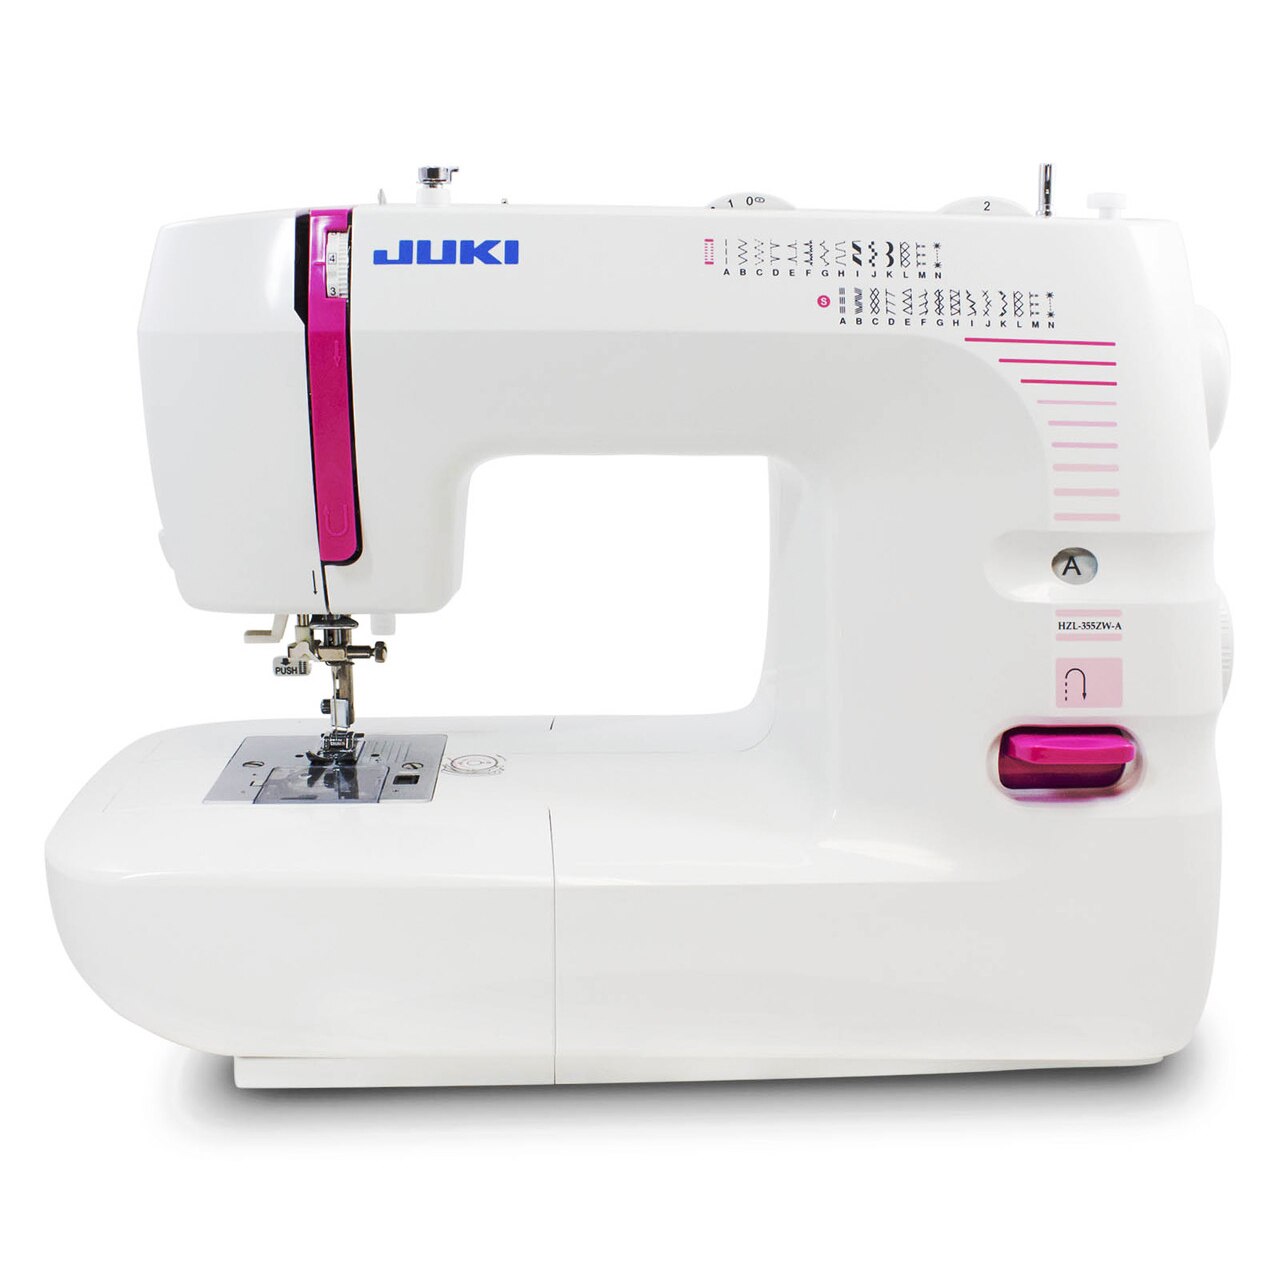 Juki Sewing Machines for Every Type of Sewer - Premier Stitching